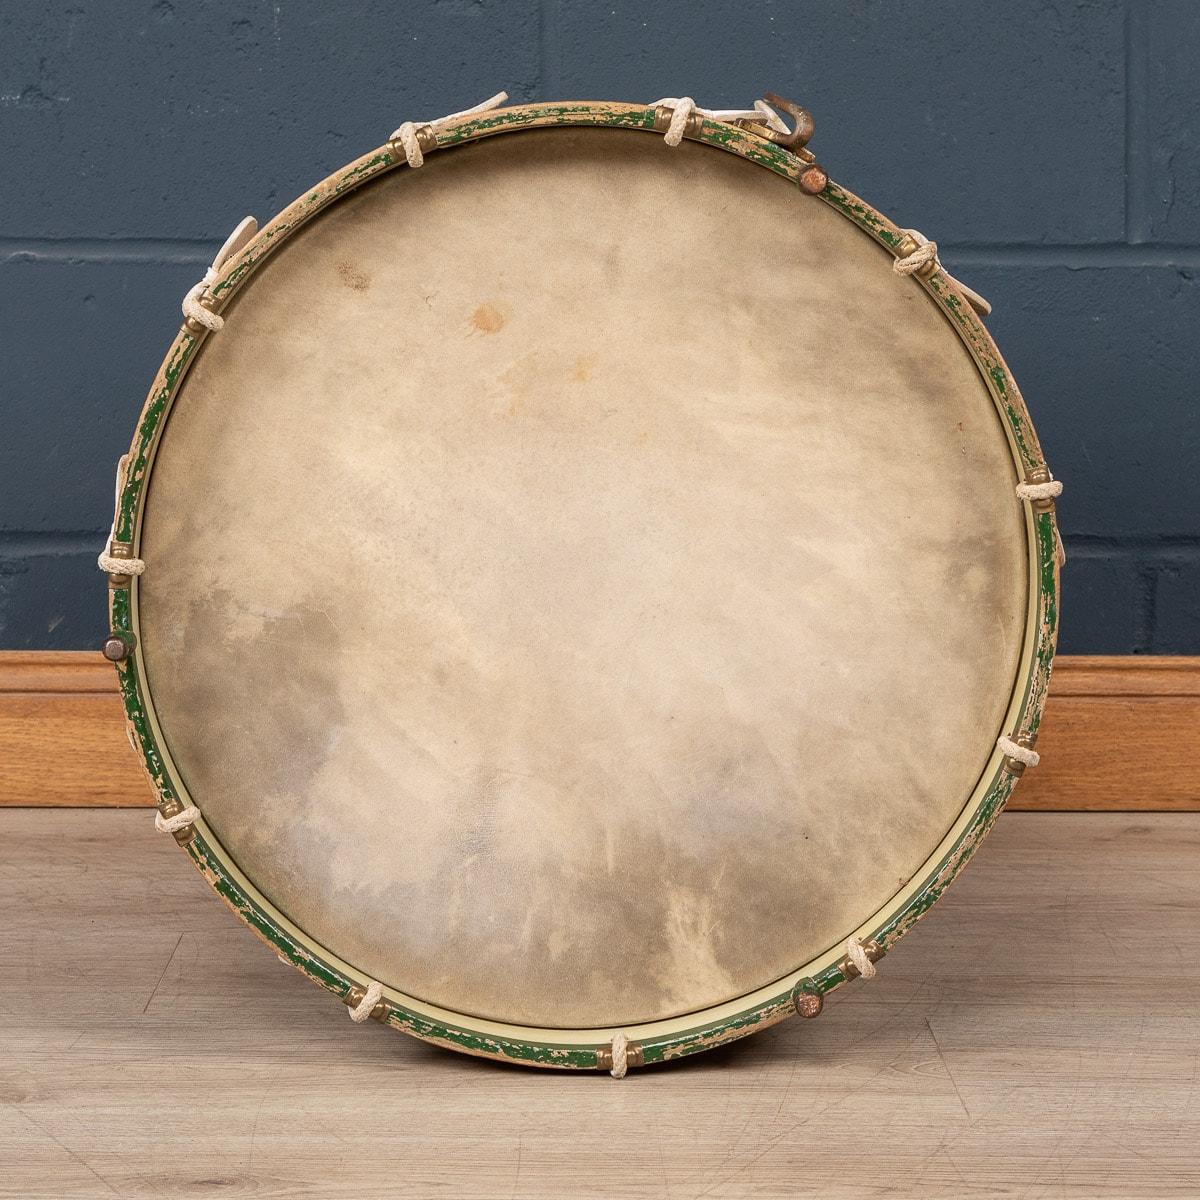 20th Century British Ceremonial Drum from the 22nd Croydon Group 1